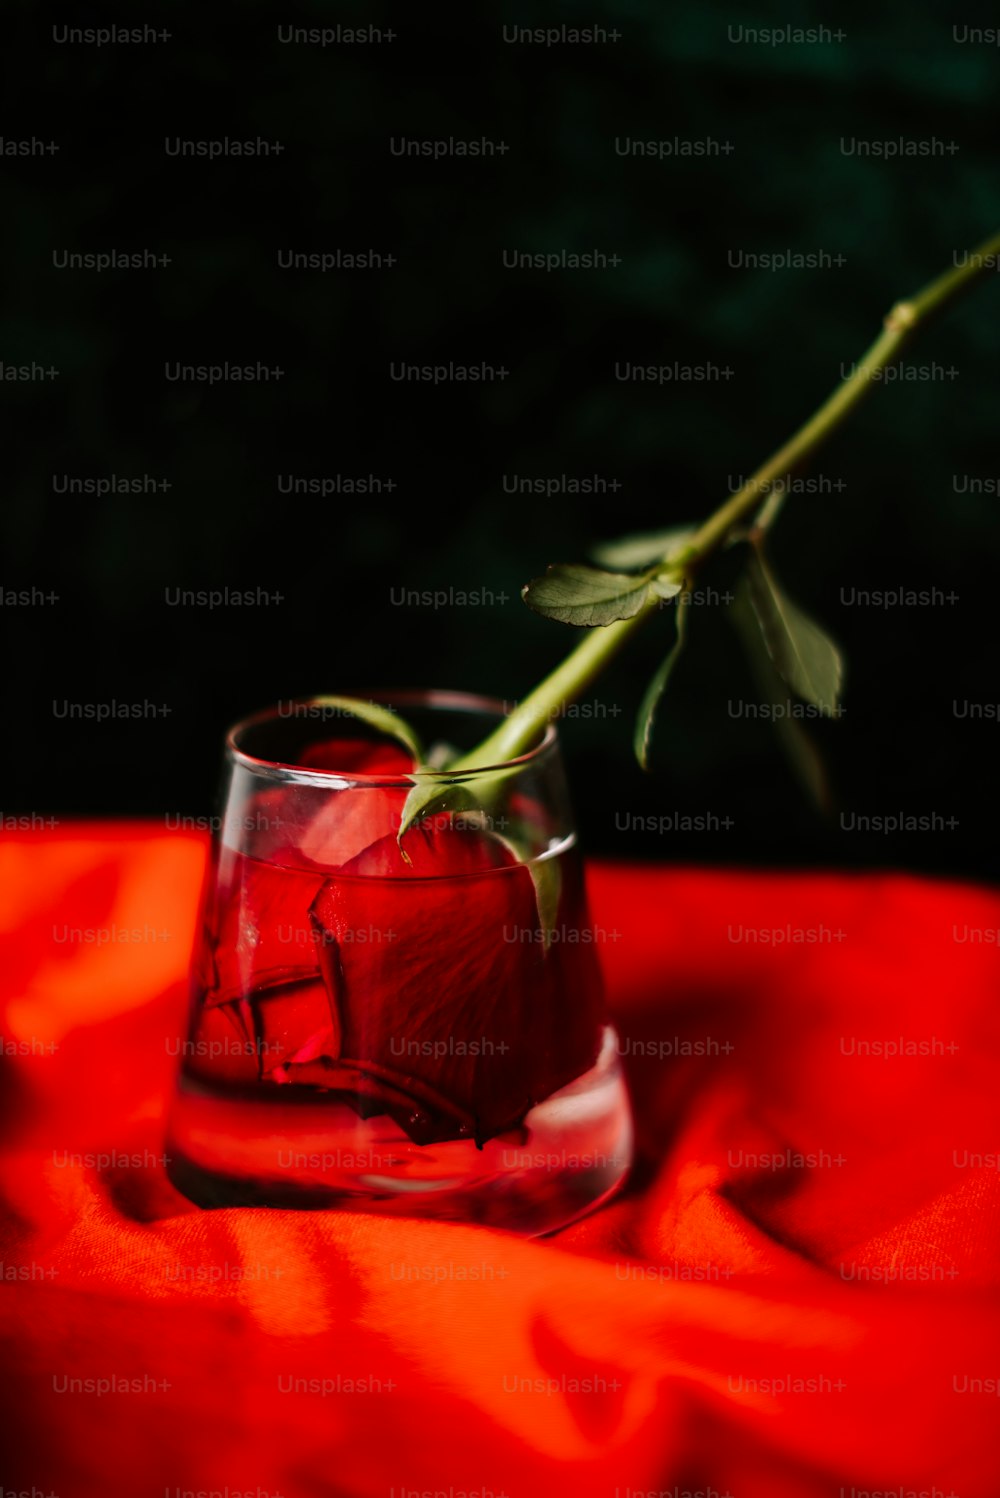 a single red rose in a glass of water